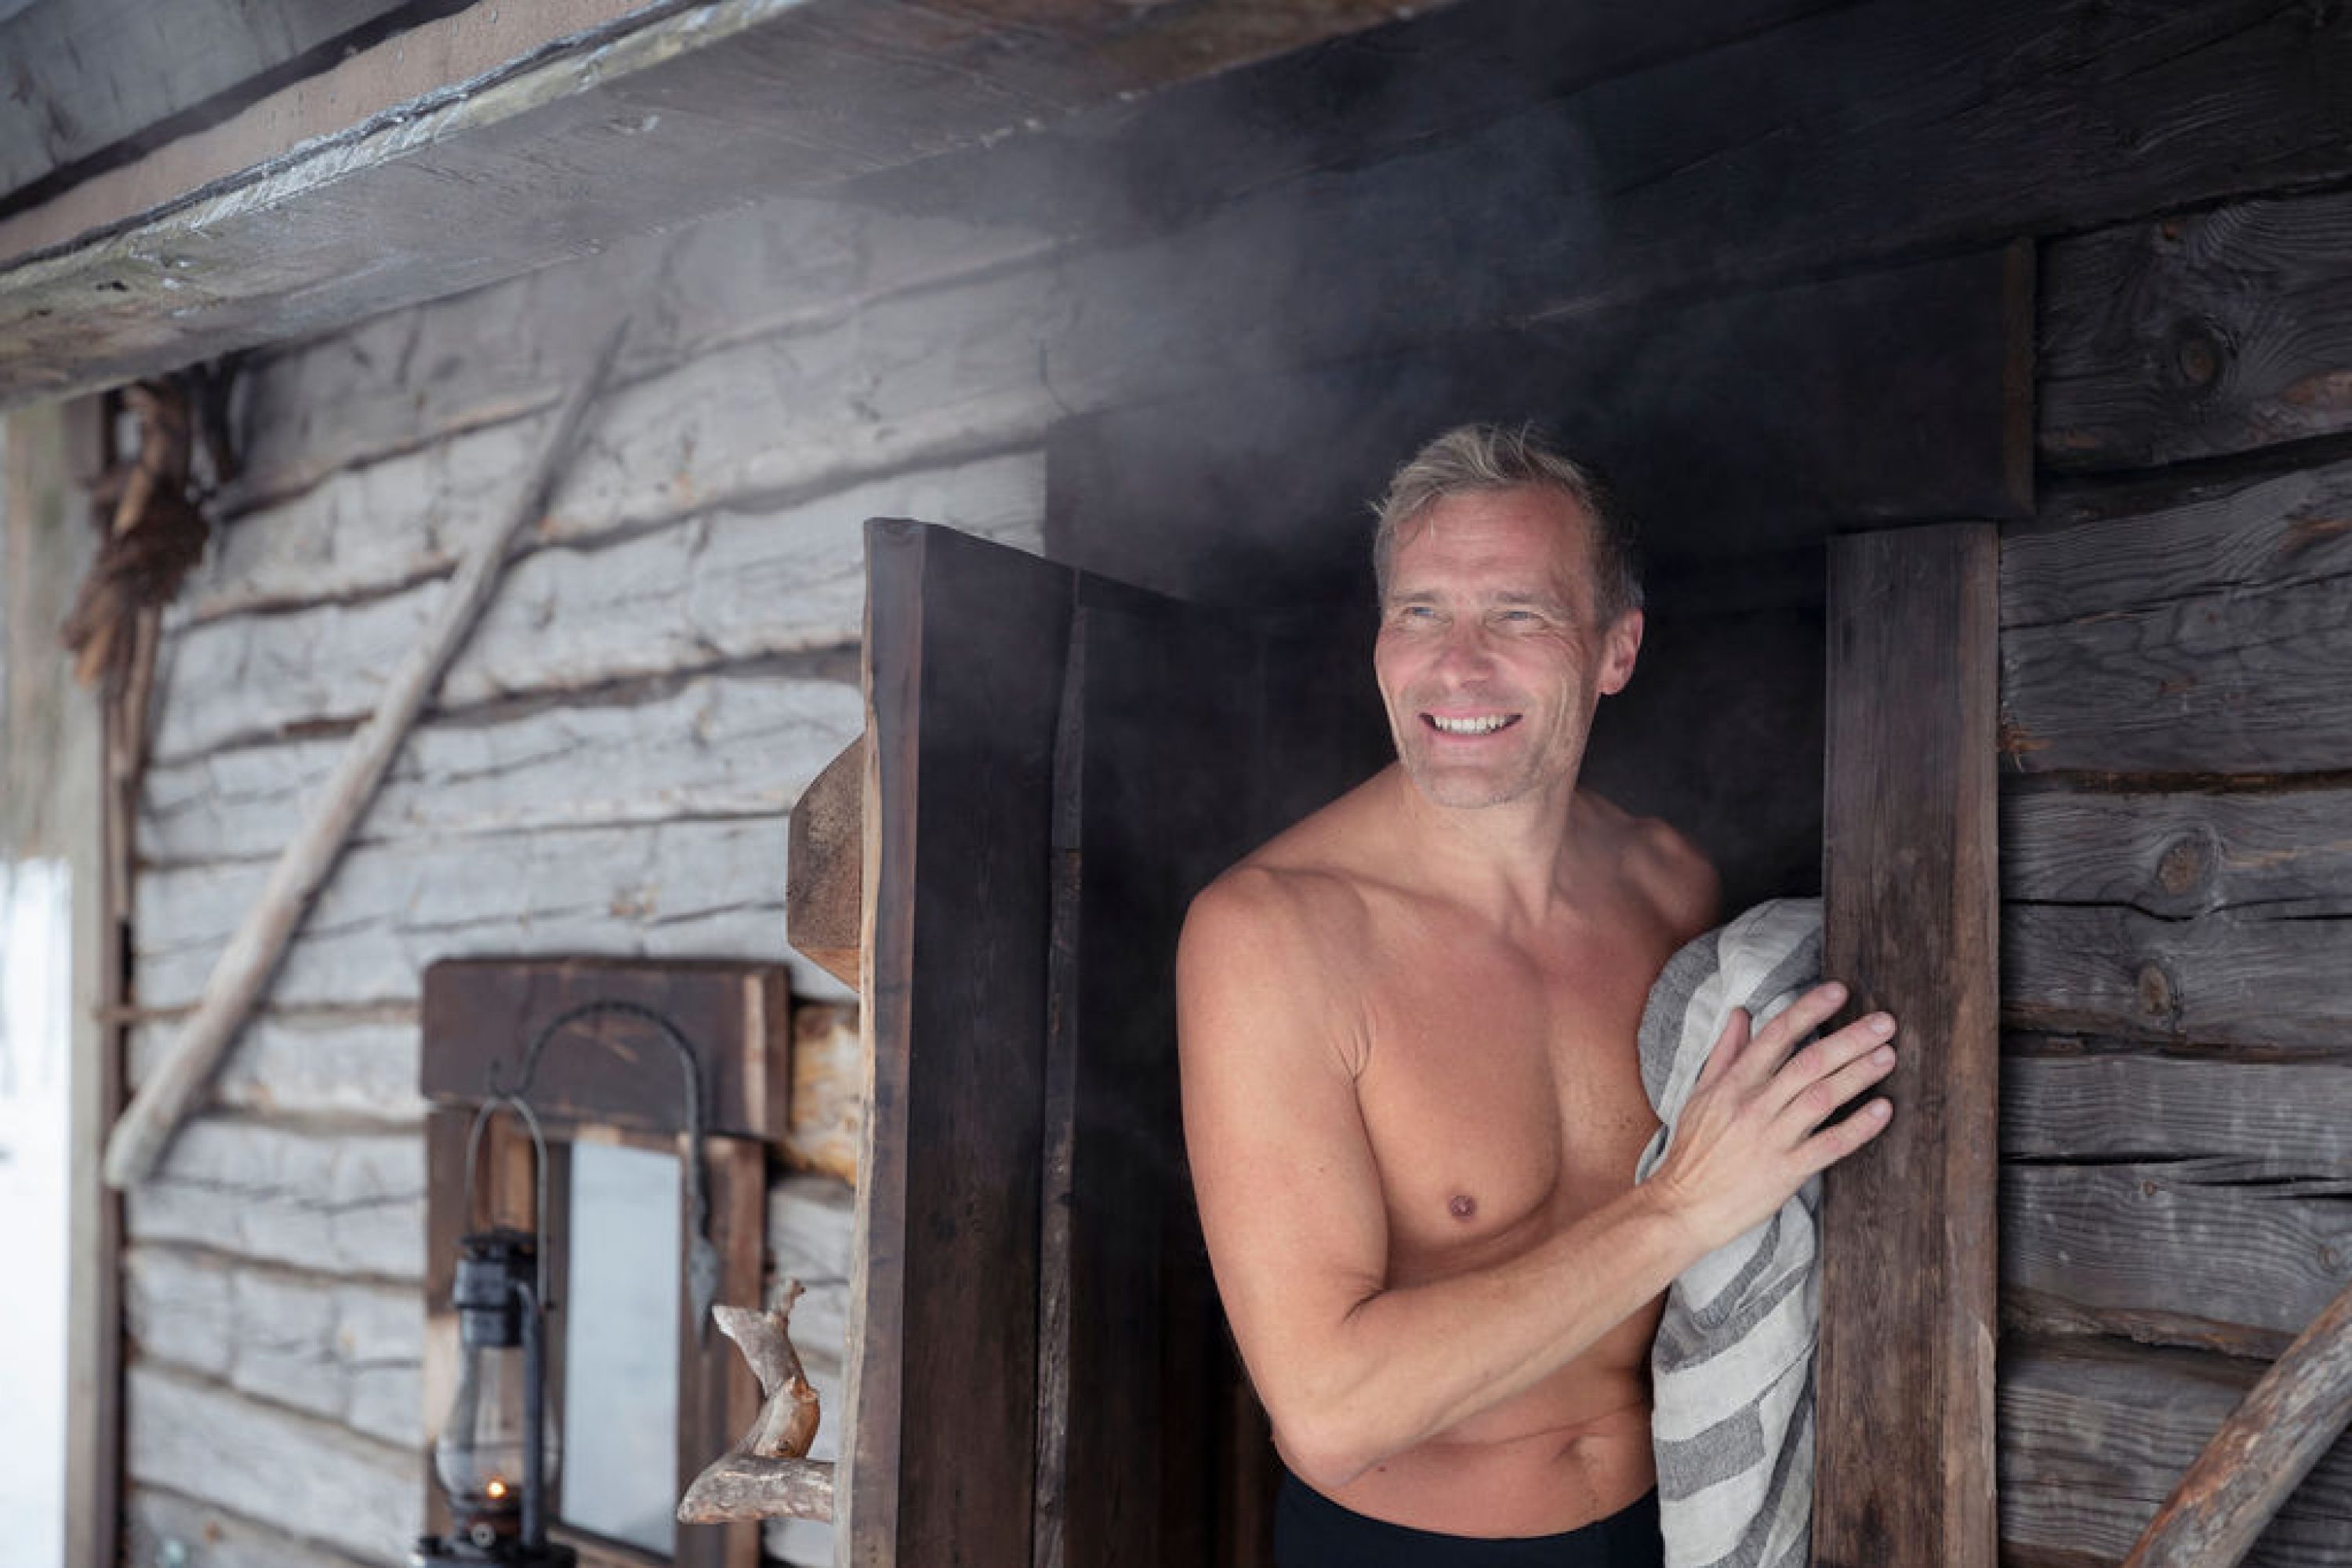 A man standing in front of the sauna